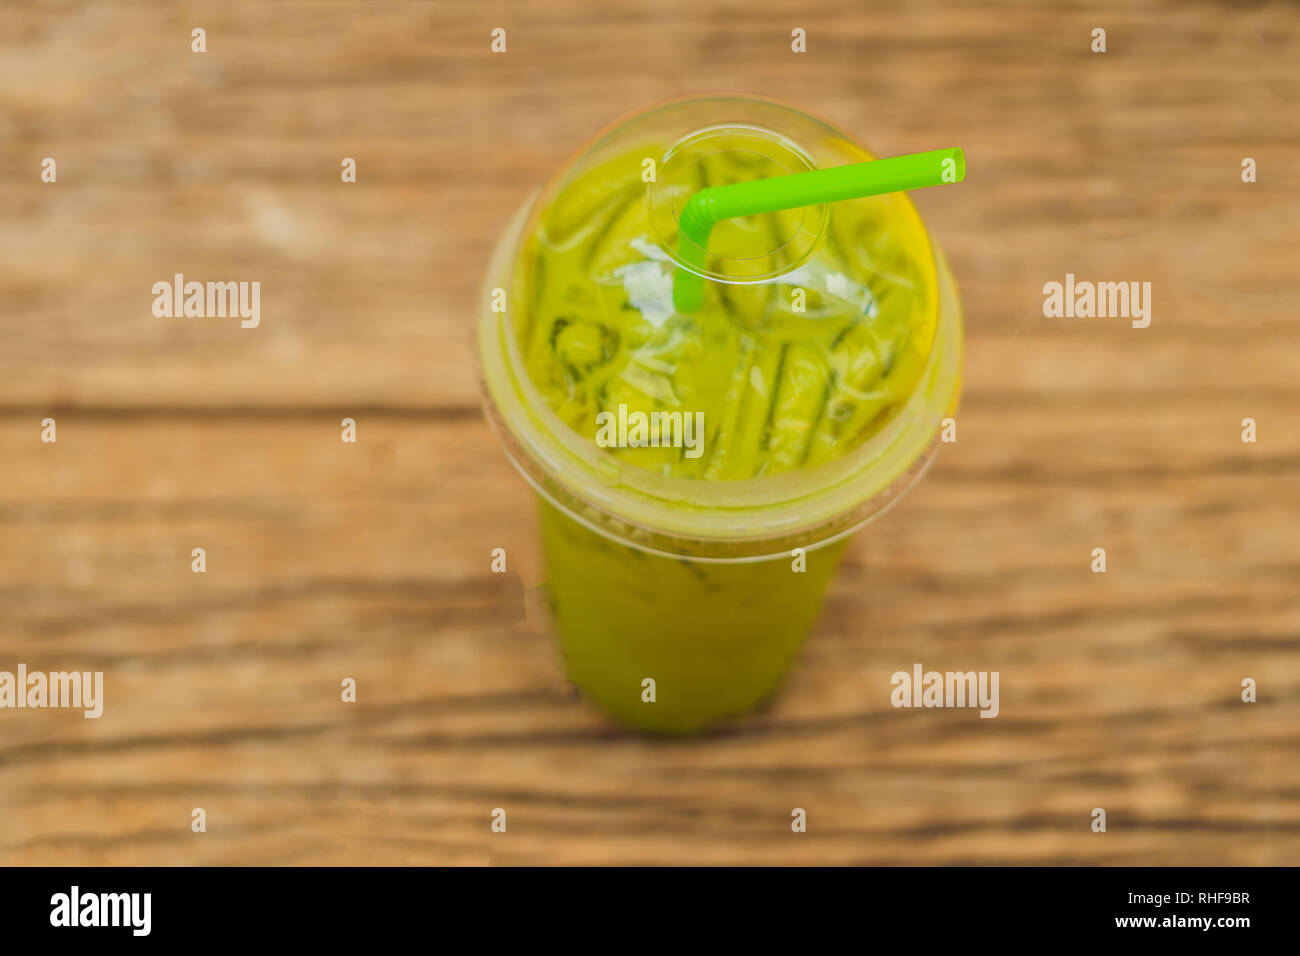 https://c8.alamy.com/comp/RHF9BR/green-tea-latte-with-ice-in-plastic-cup-and-straw-on-wooden-background-homemade-iced-matcha-latte-tea-with-milk-take-away-RHF9BR.jpg